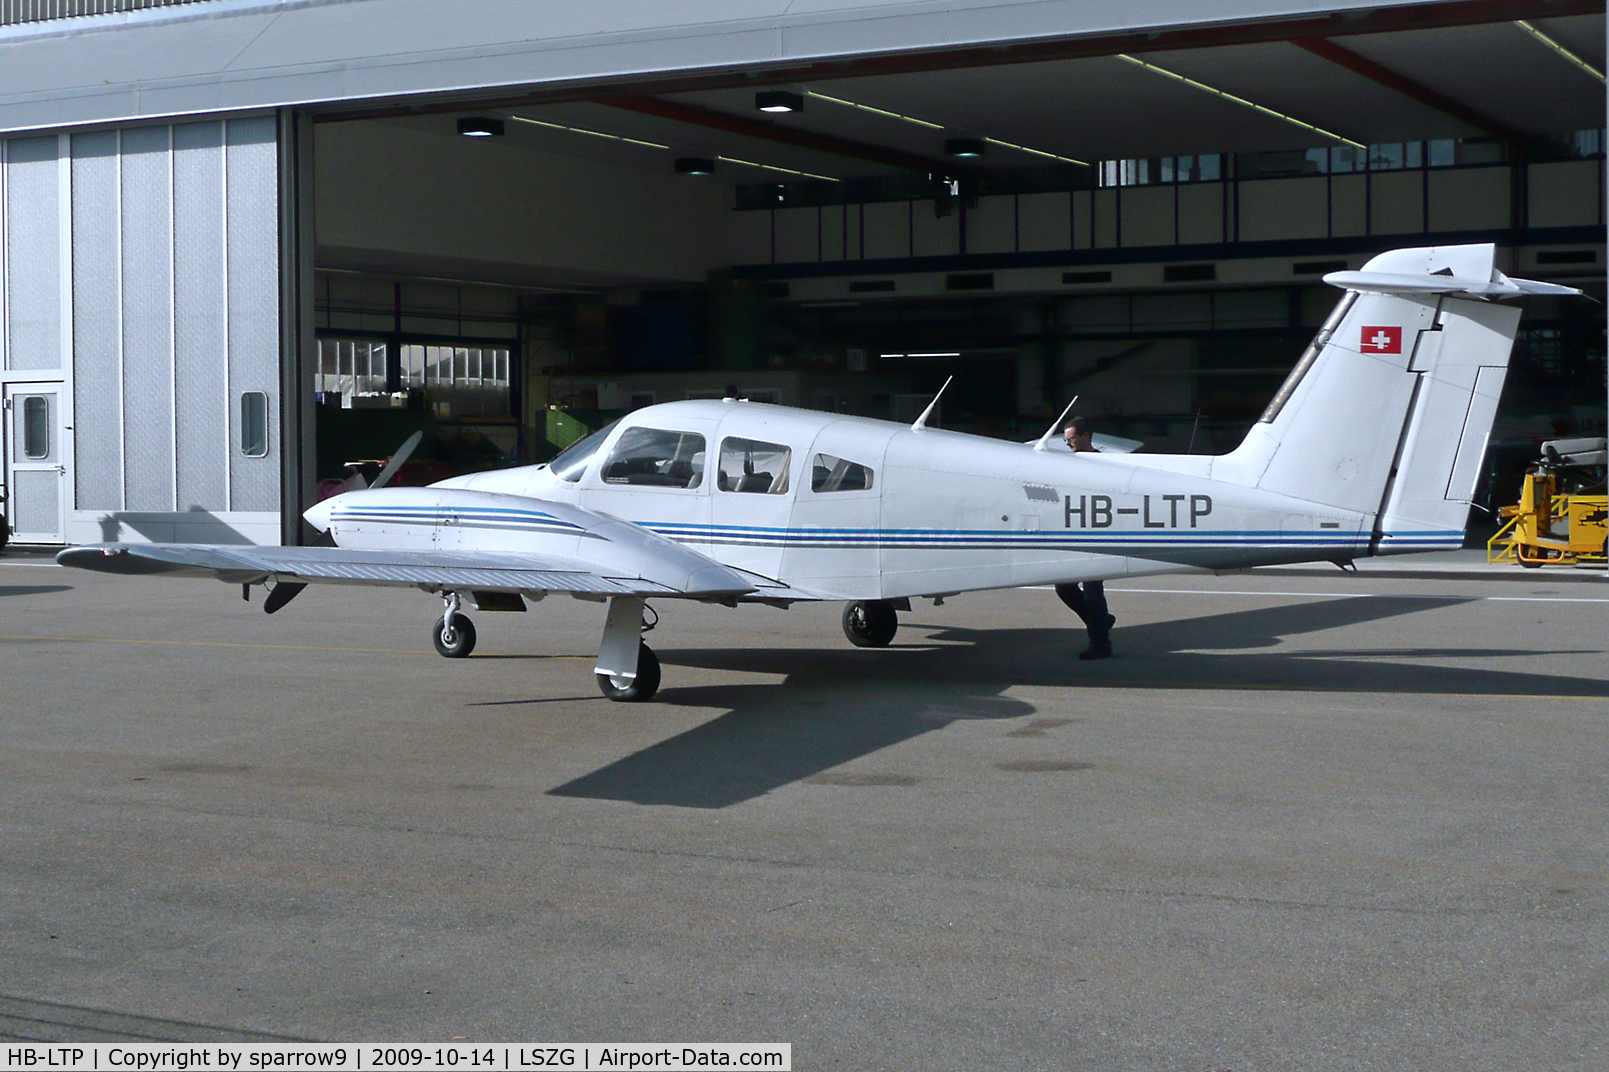 HB-LTP, 1982 Piper PA-44-180T Turbo Seminole C/N 44-8207008, At Grenchen.